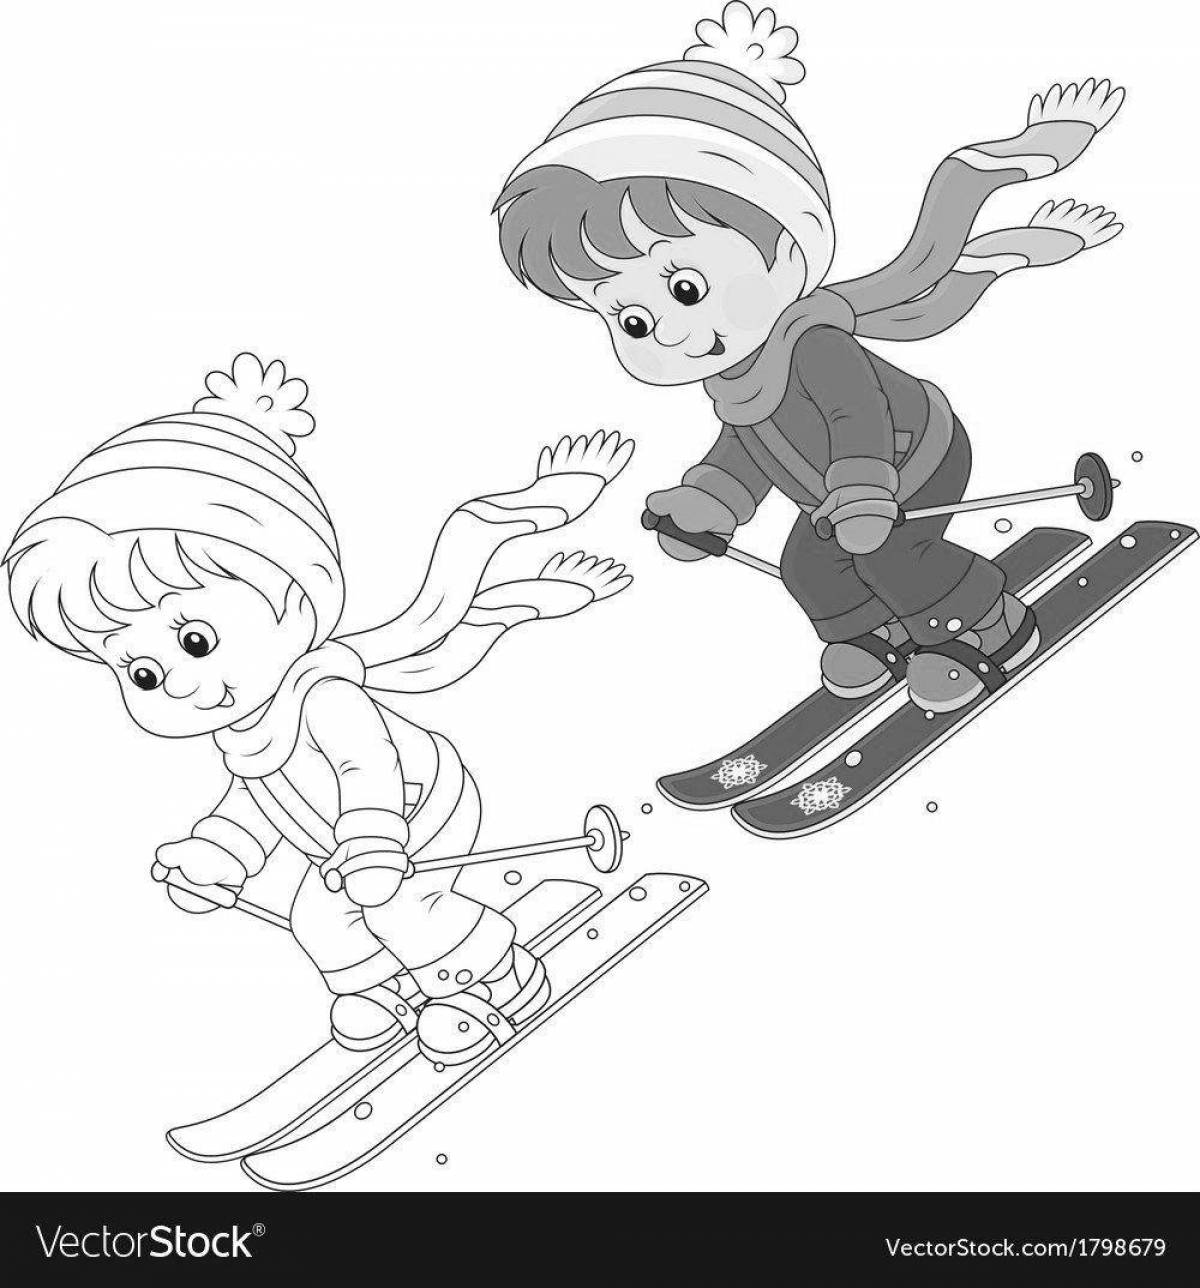 Lovely winter sports coloring page for kindergarten